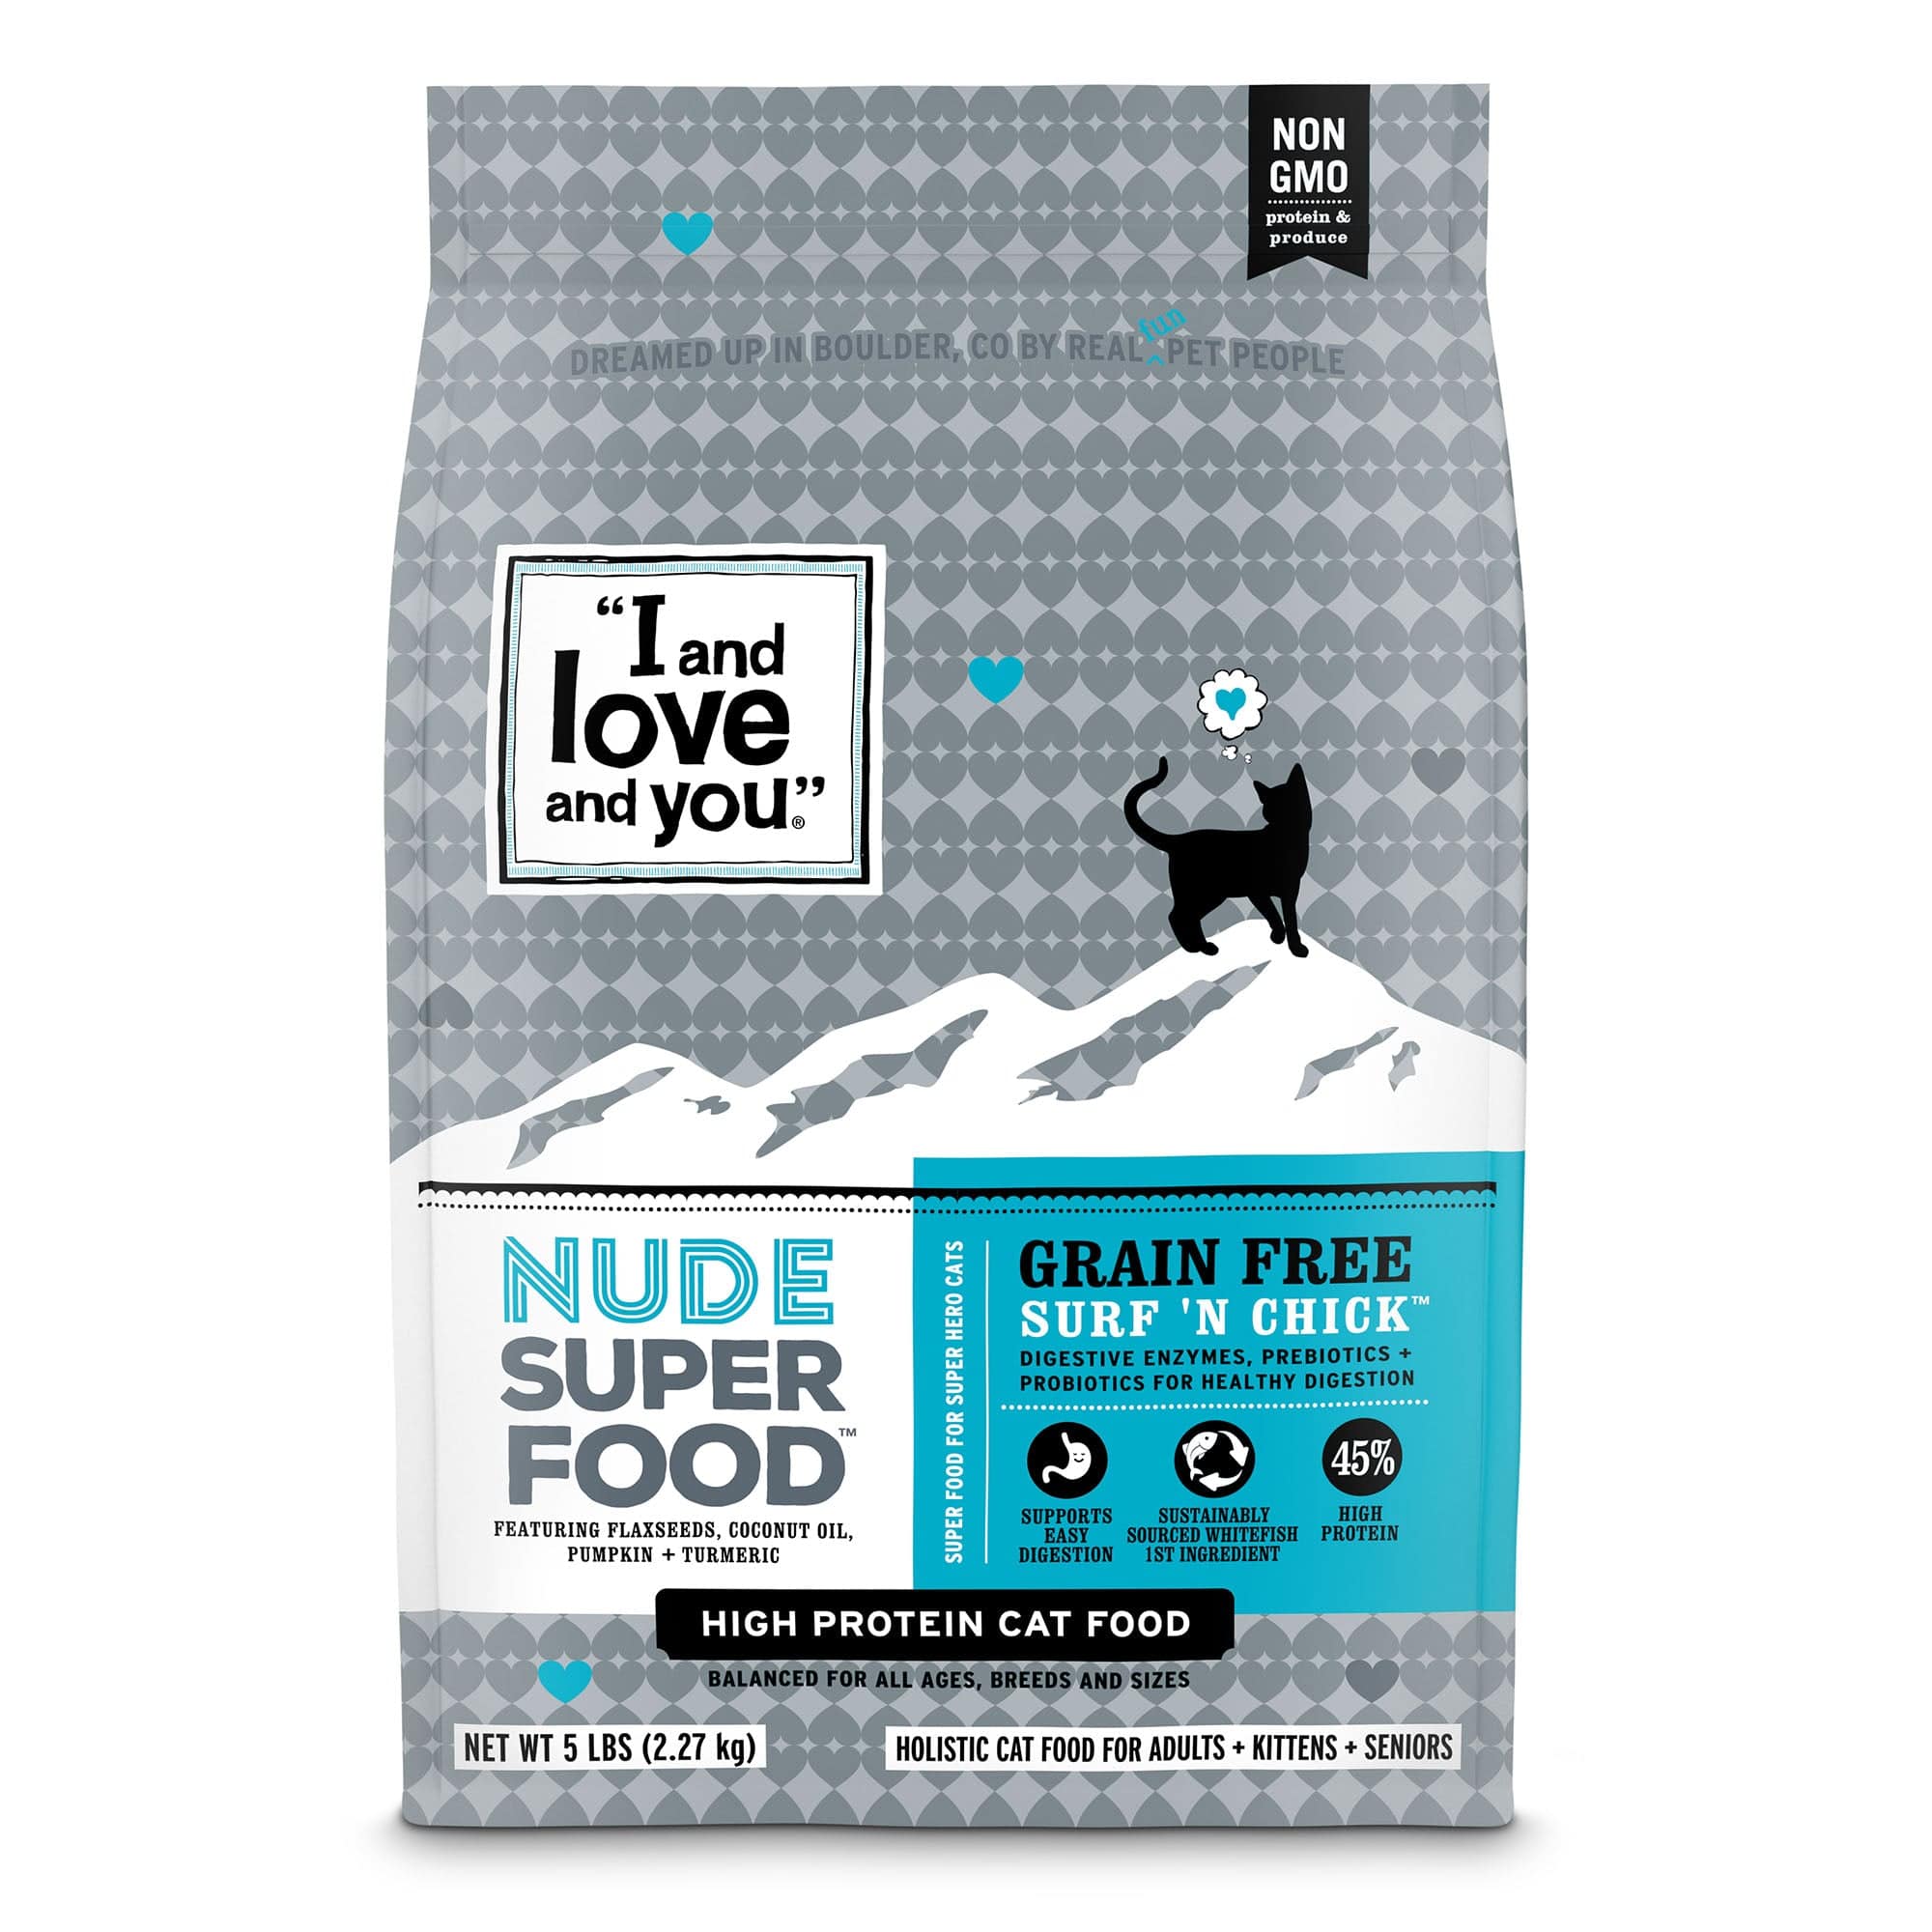 Surf 'n Chick Dry Cat Food | Nude Superfood | I and love and you